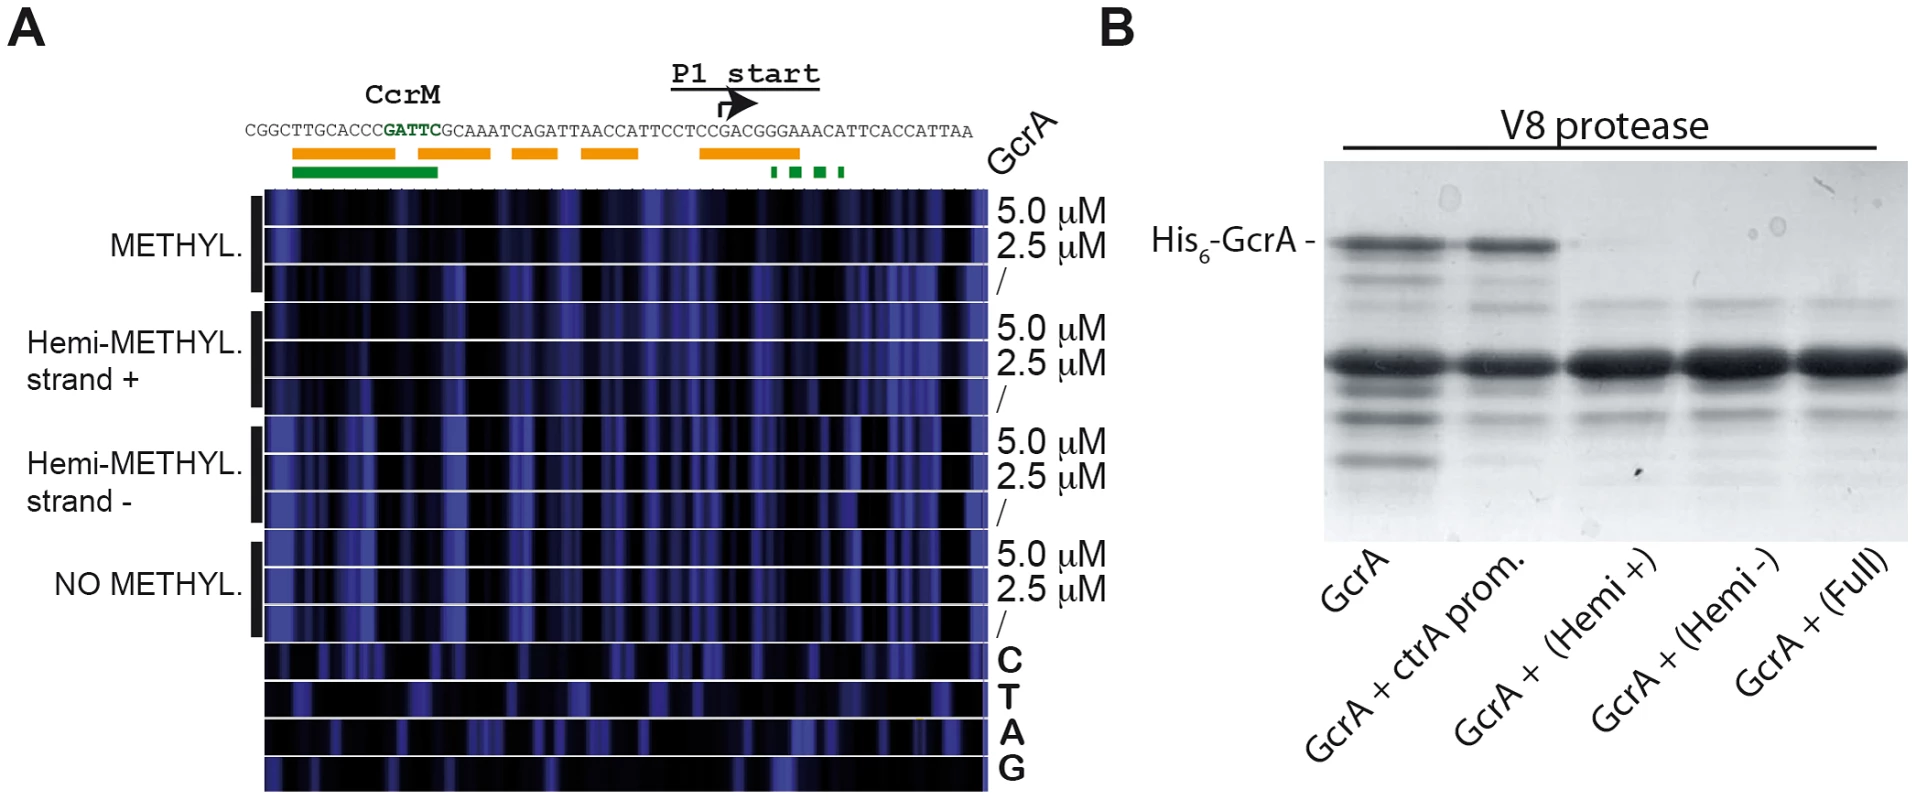 Binding of GcrA to DNA in different GAnTC methylation states and conformation al changes of GcrA induced by DNA.